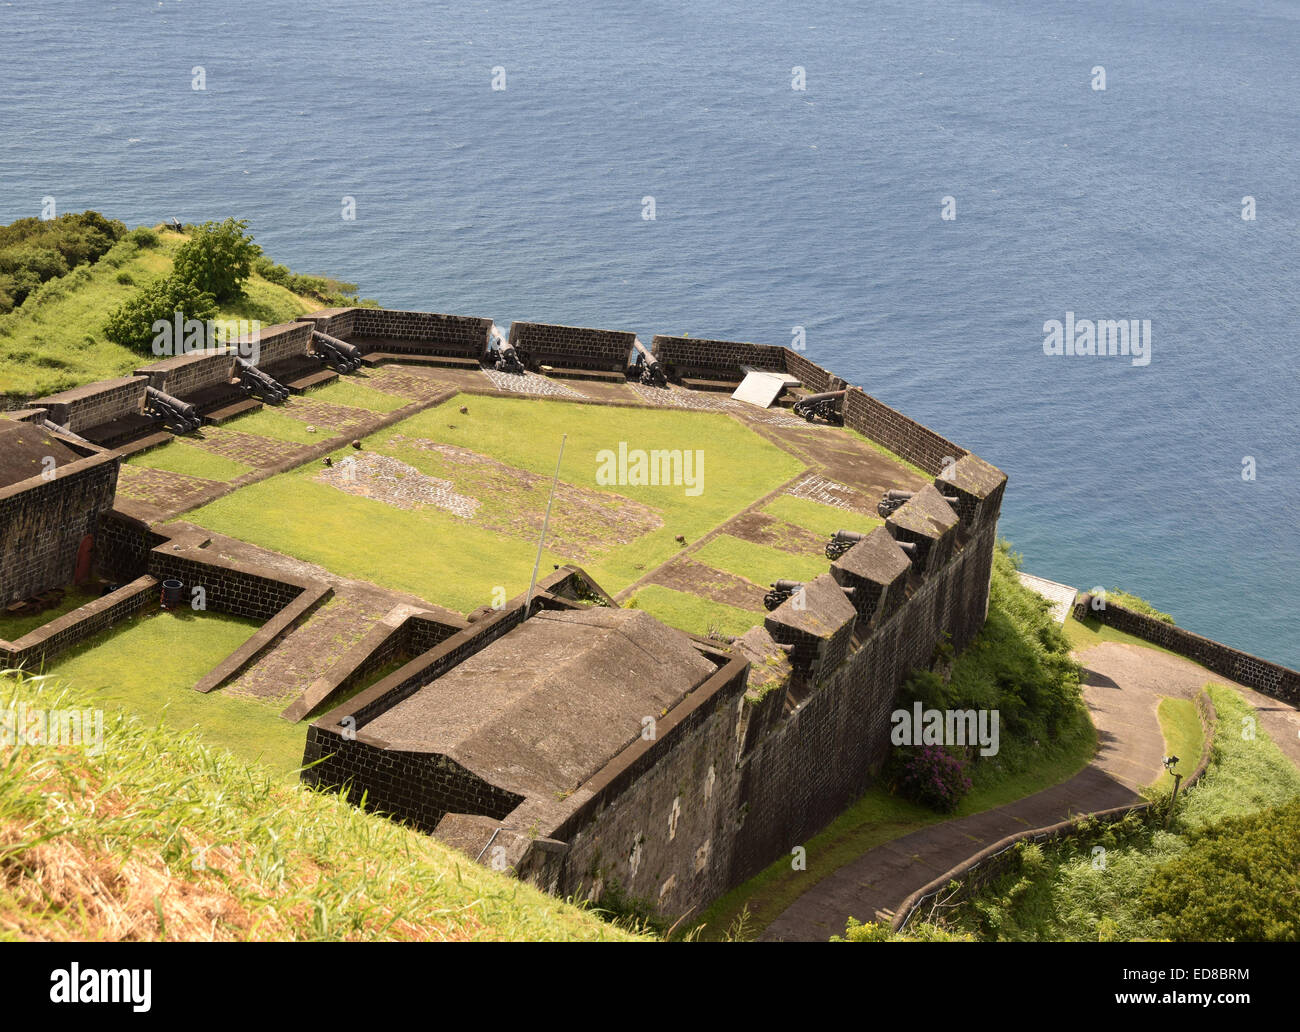 Brimstone Hill Fort George overlooking the Caribbean on the island of St Kitts Stock Photo